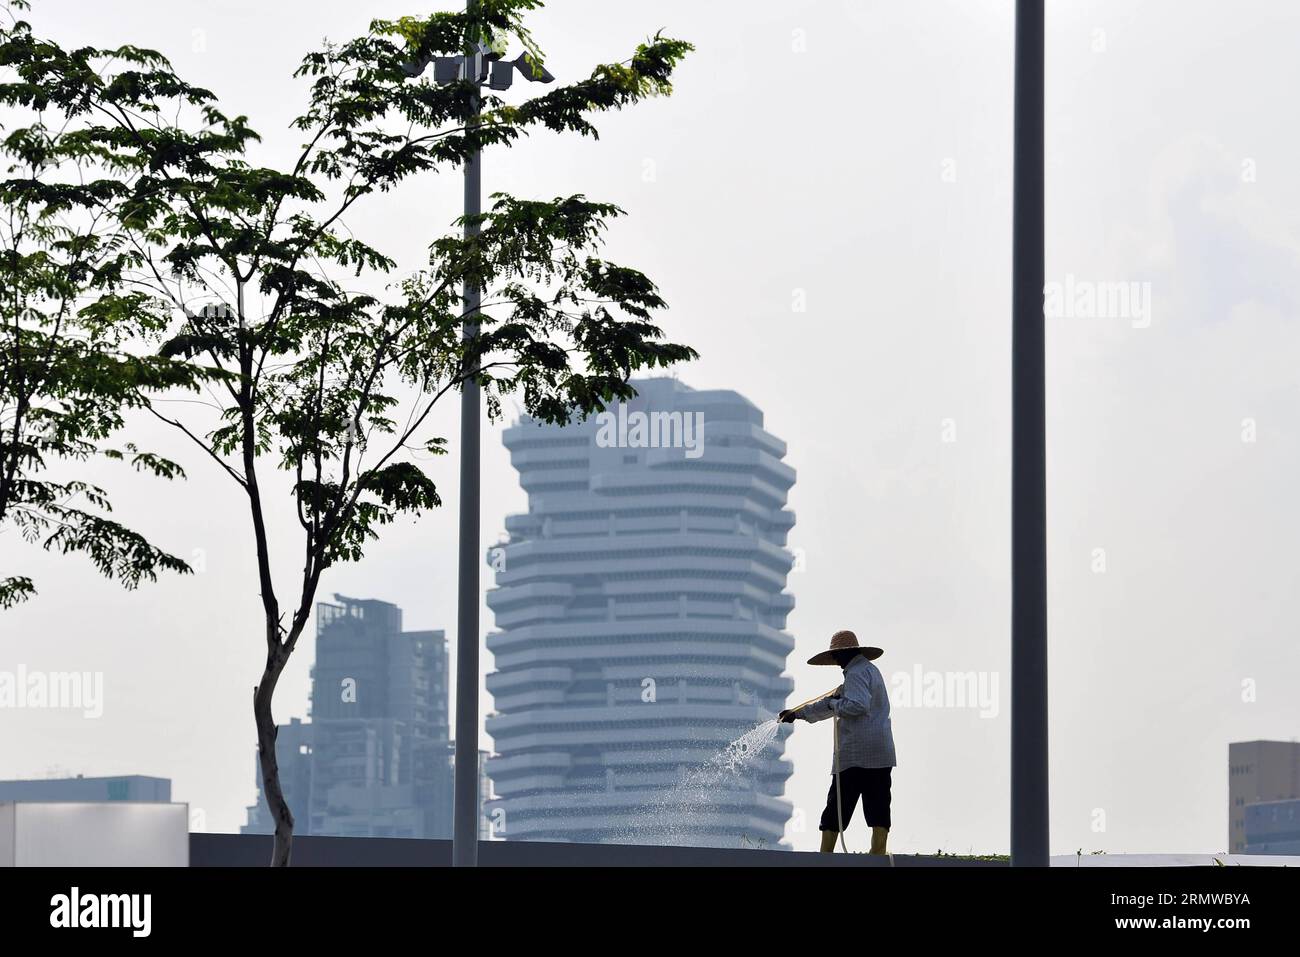 A gardener works in haze in Singapore, Oct. 20, 2014. Singapore s 3-hour Pollution Standard Index (PSI) hit 113 on Monday. )(bxq) SINGAPORE-POLLUTION ThenxChihxWey PUBLICATIONxNOTxINxCHN   a GARDENER Works in HAZE in Singapore OCT 20 2014 Singapore S 3 hour Pollution Standard Index PSI Hit 113 ON Monday  Singapore Pollution  PUBLICATIONxNOTxINxCHN Stock Photo